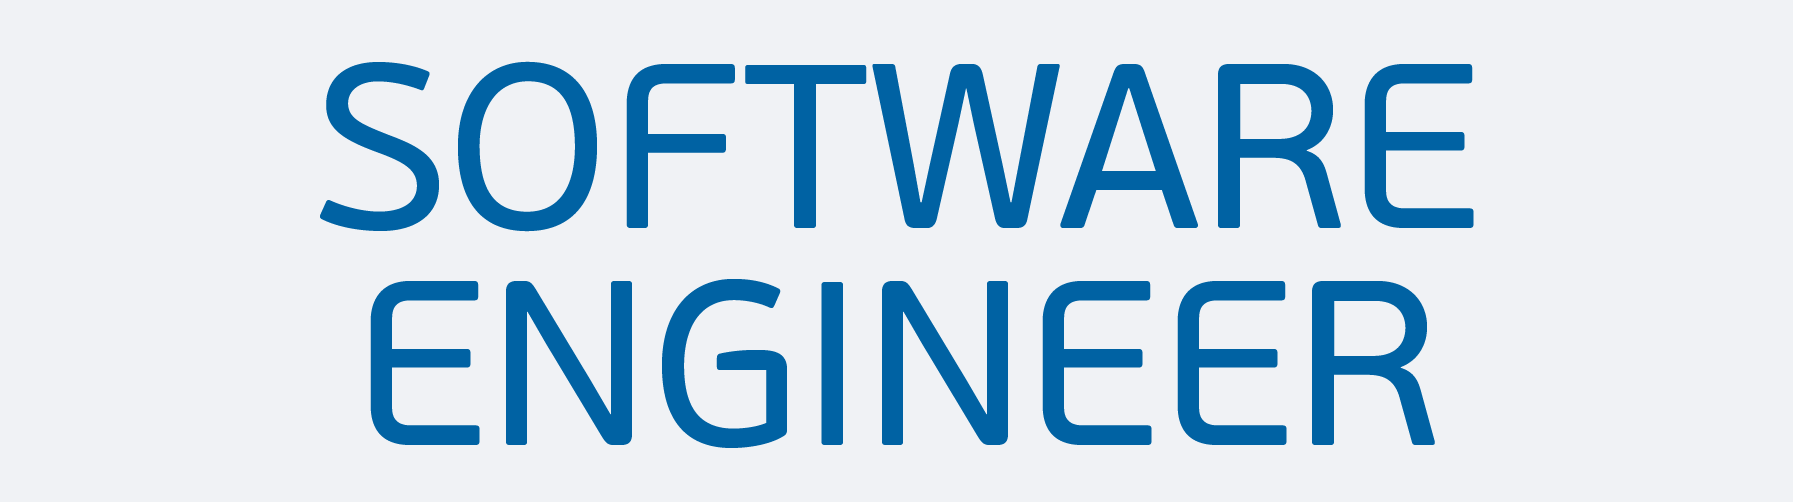 software engineer-02.png